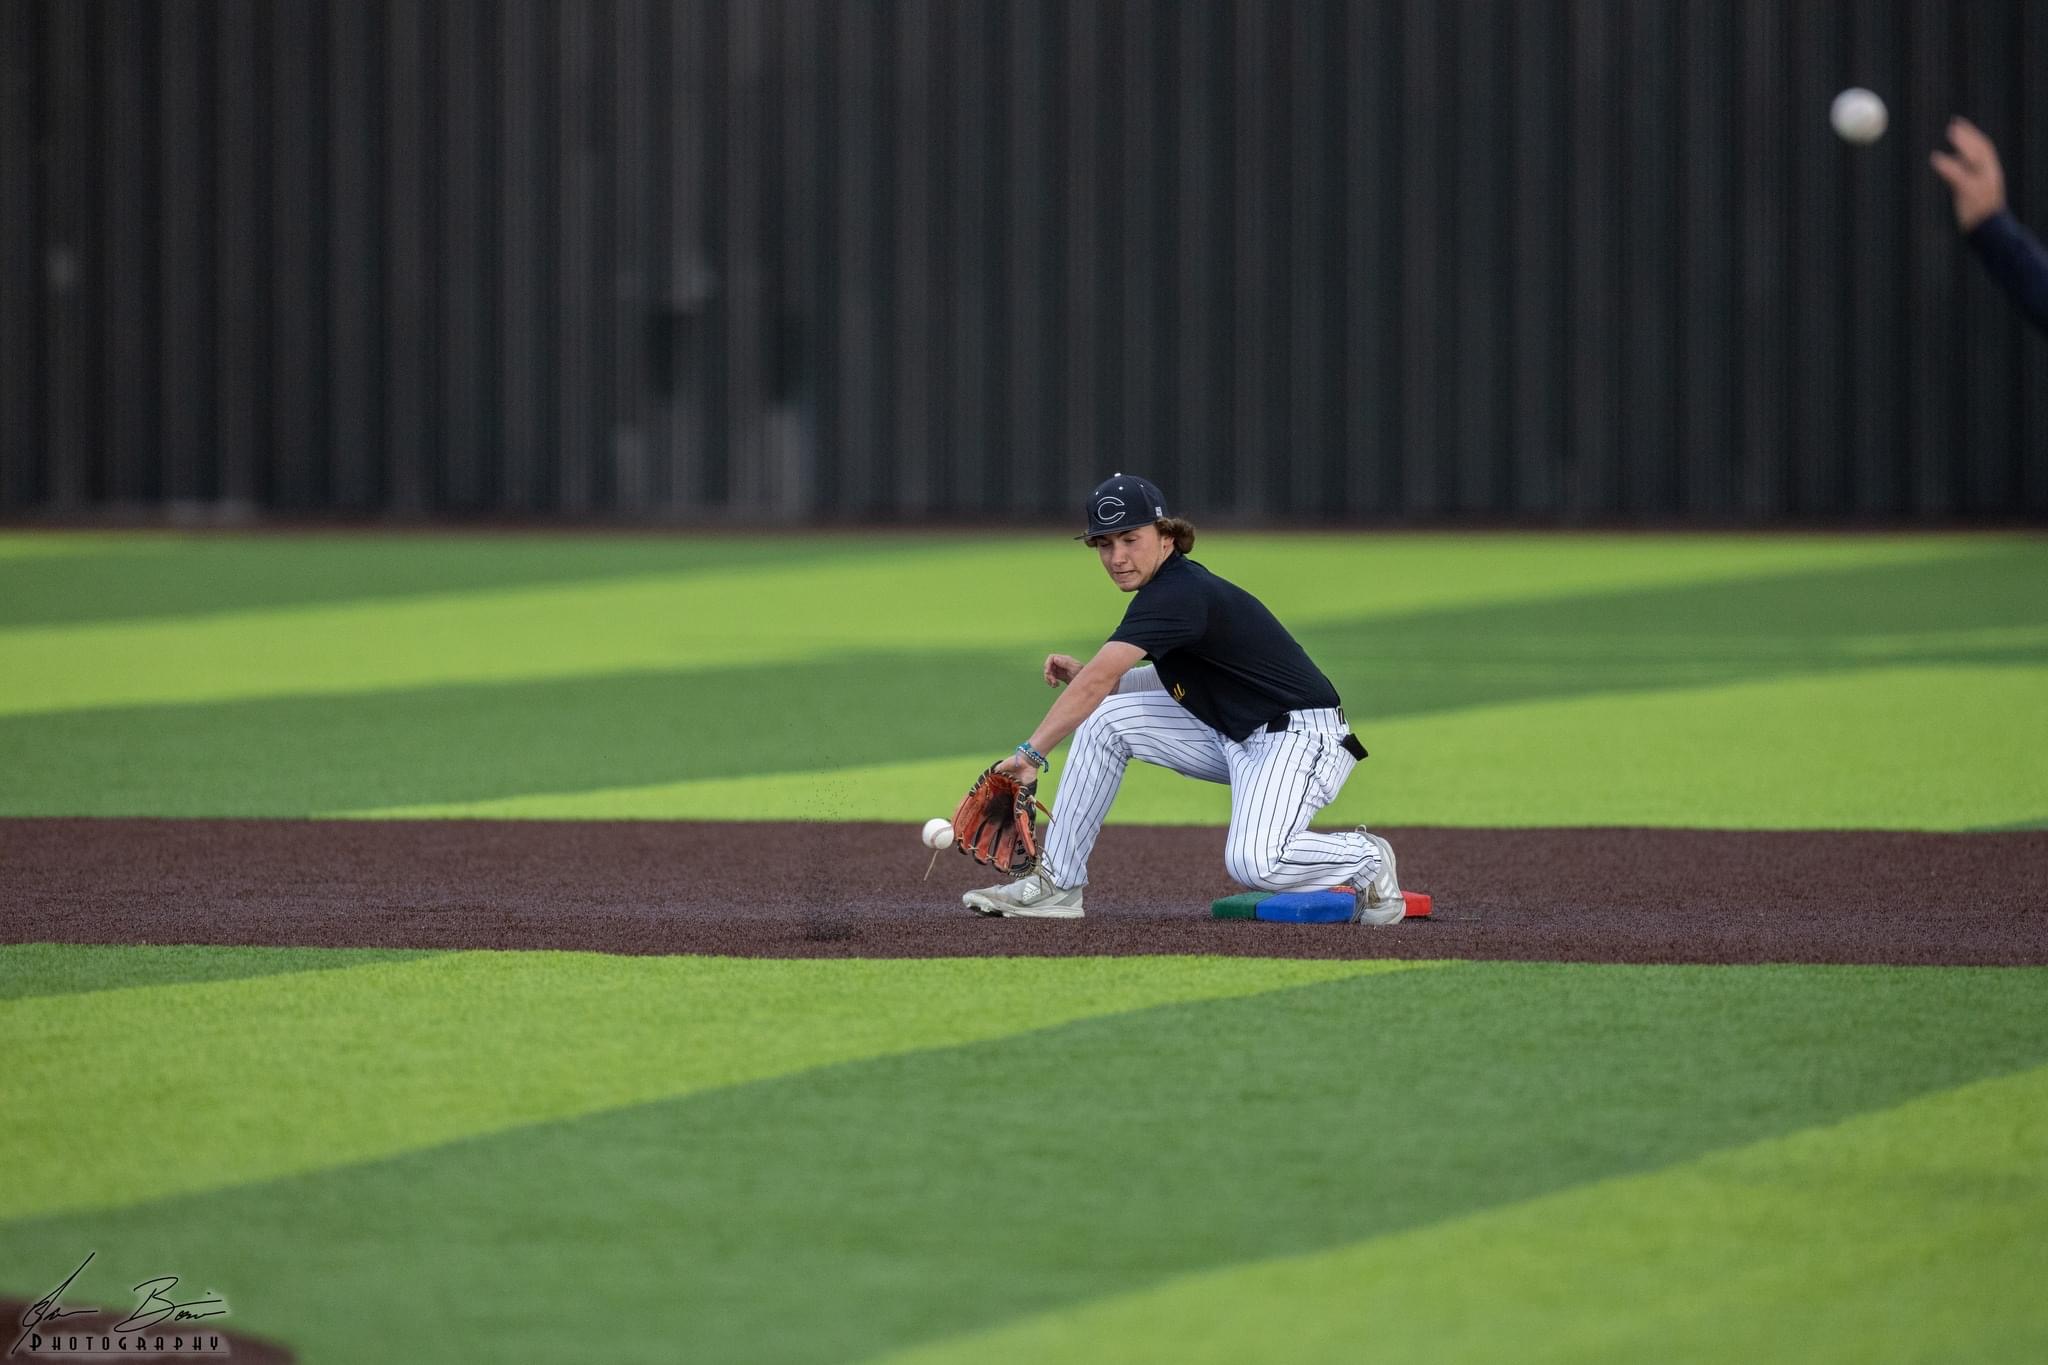 Check out the academic portfolio of the college baseball player Brayson Moore